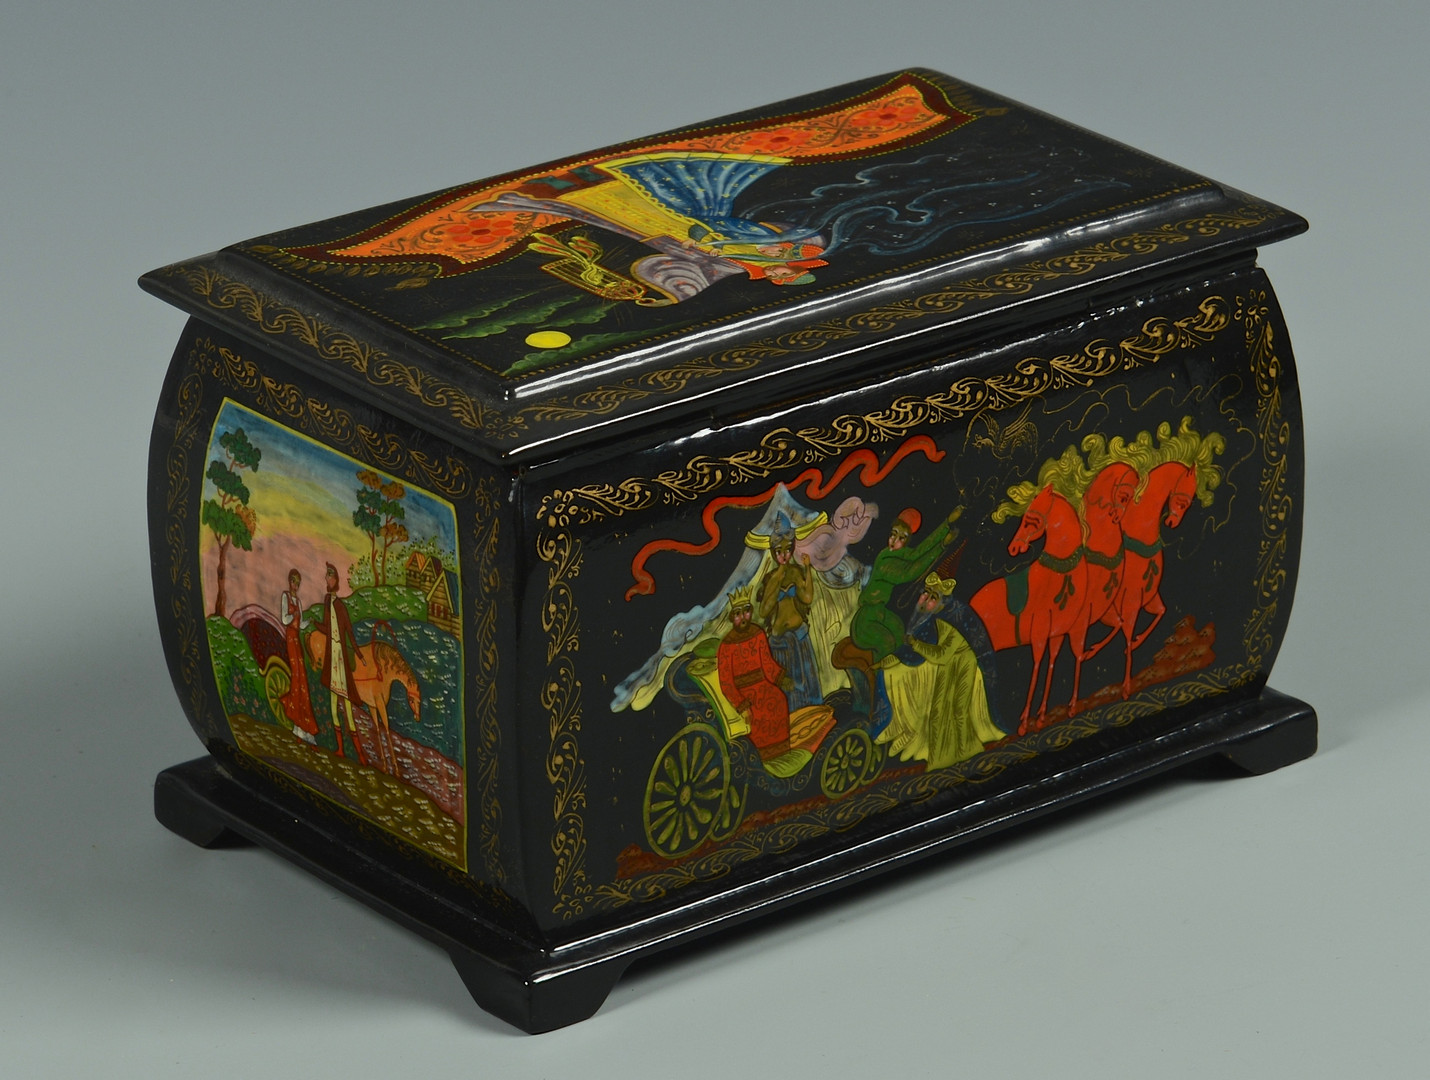 Russian Lacquer Boxes From 73